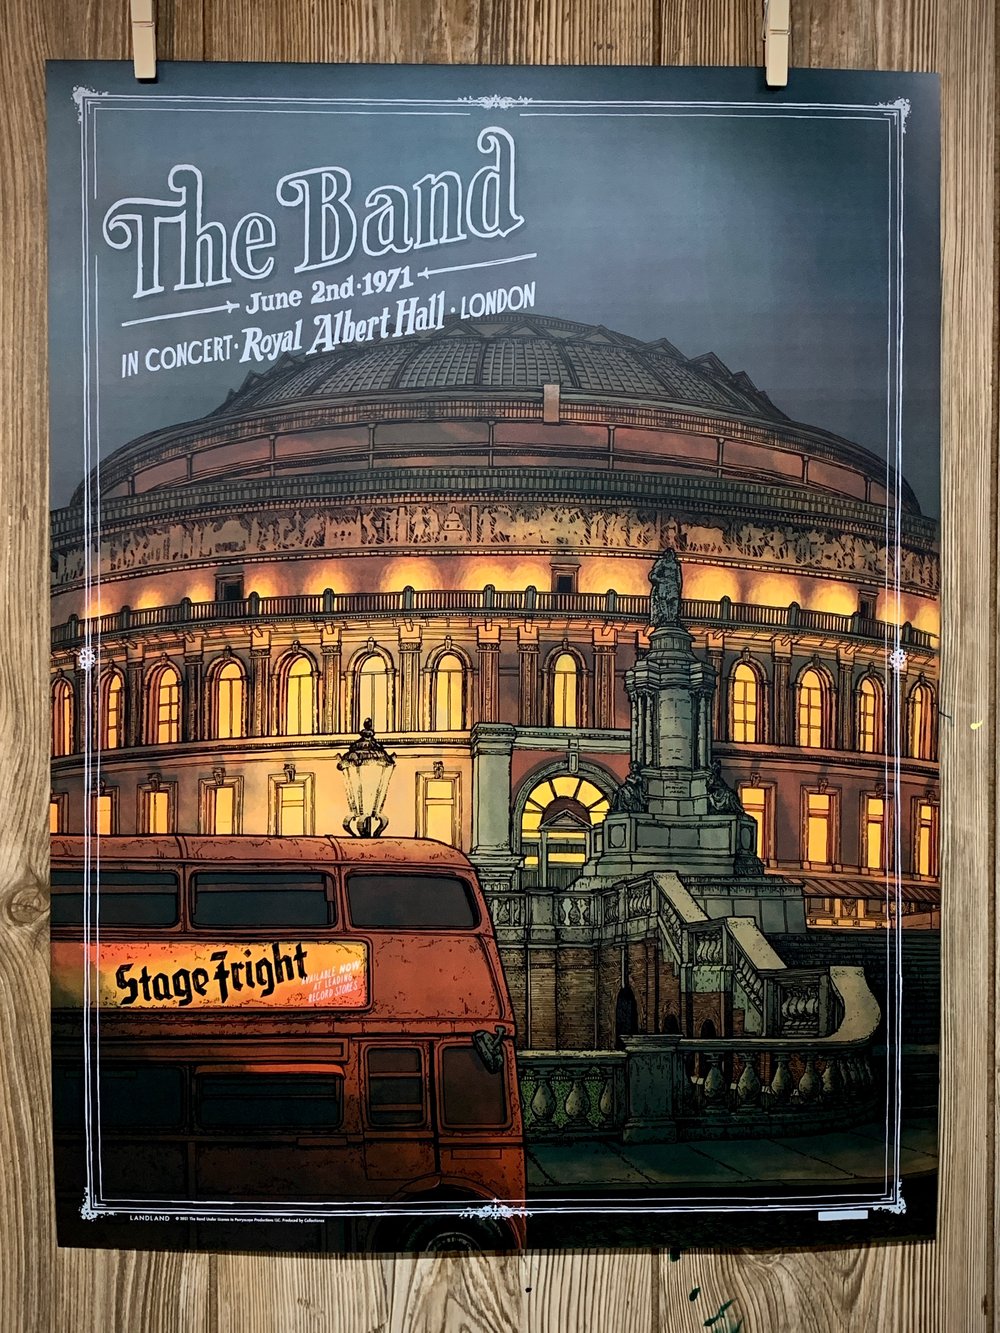 The Band ("Royal Albert Hall 50th Anniversary") • L.E. Official Poster (18" x 24")